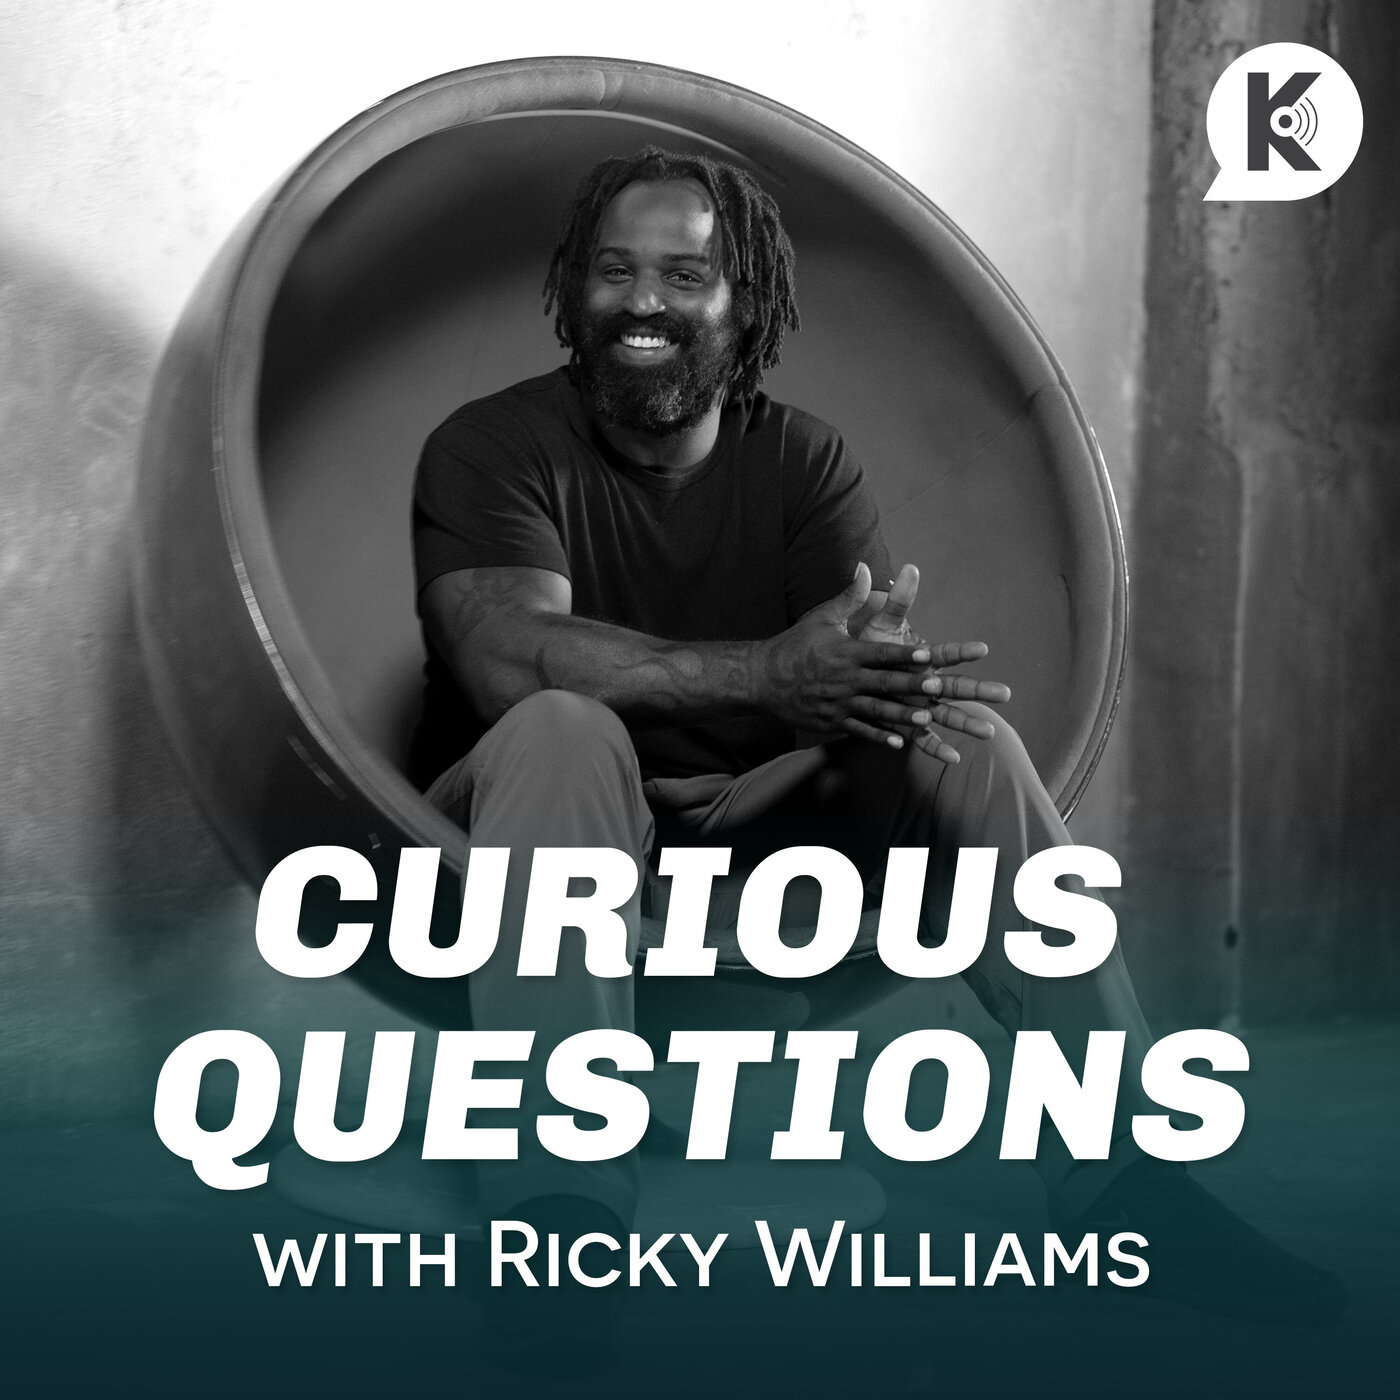 E7 Curious Questions with Ricky Williams | Ep. 7 | The AstroTwins! Ophi & Tali Join Ricky in Discussion